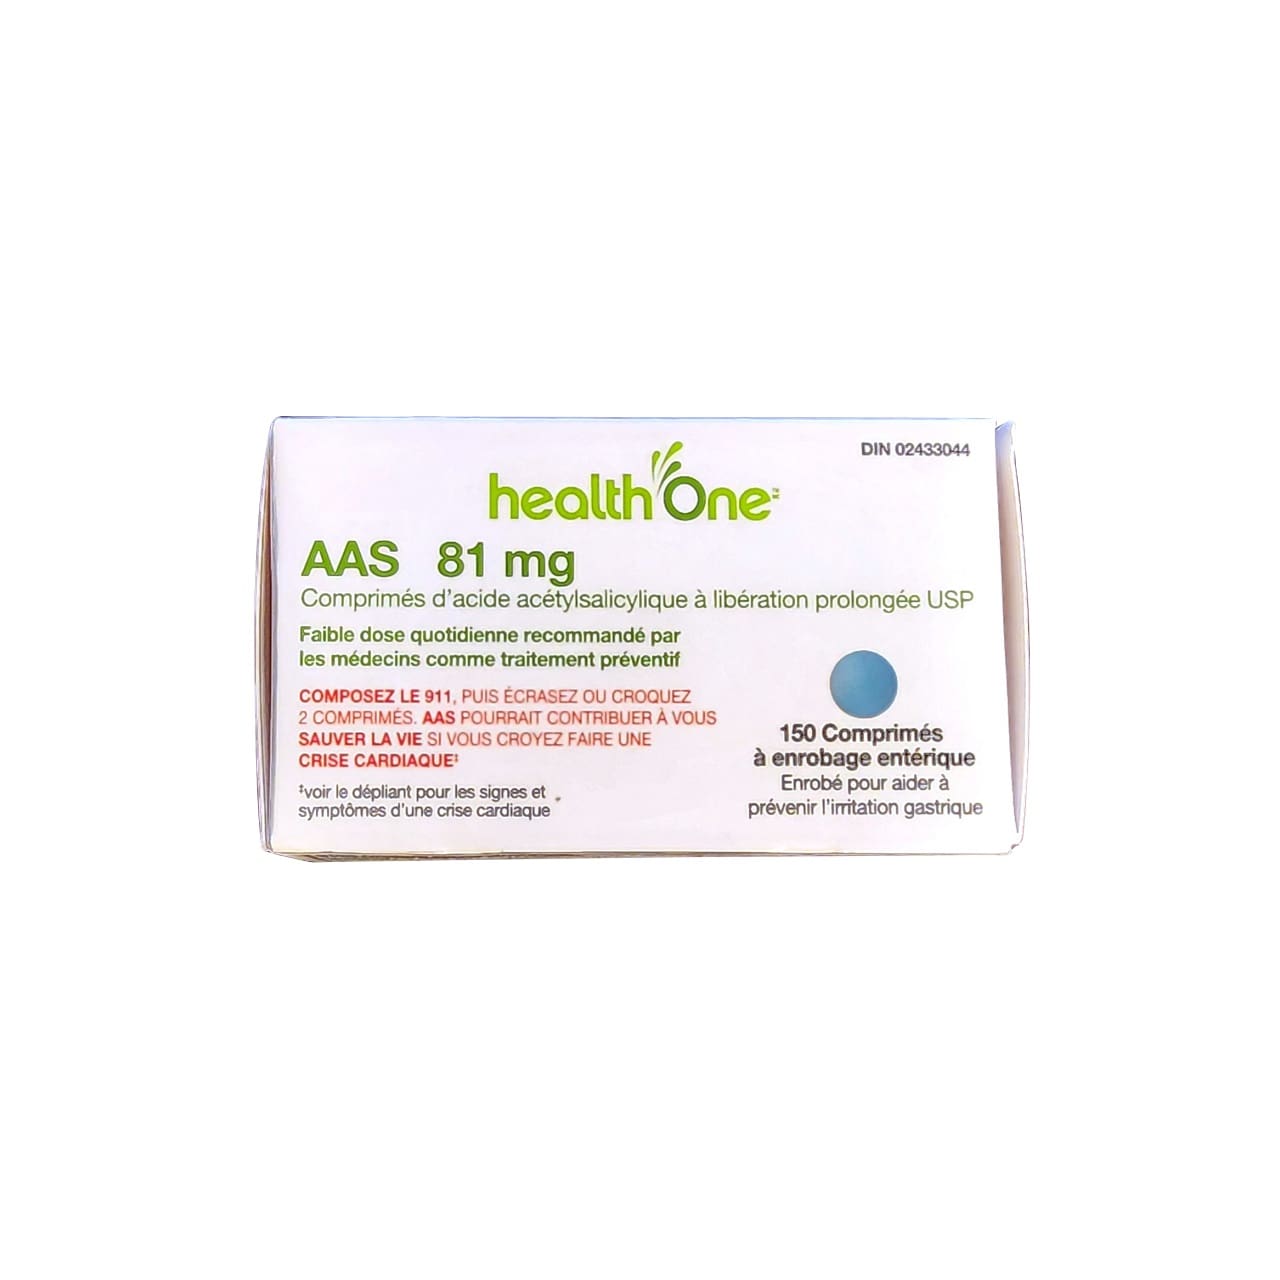 Product label for health One Acetylsalicylic Acid 81mg Low Dose Delayed Release Tablets (150 tablets) in French